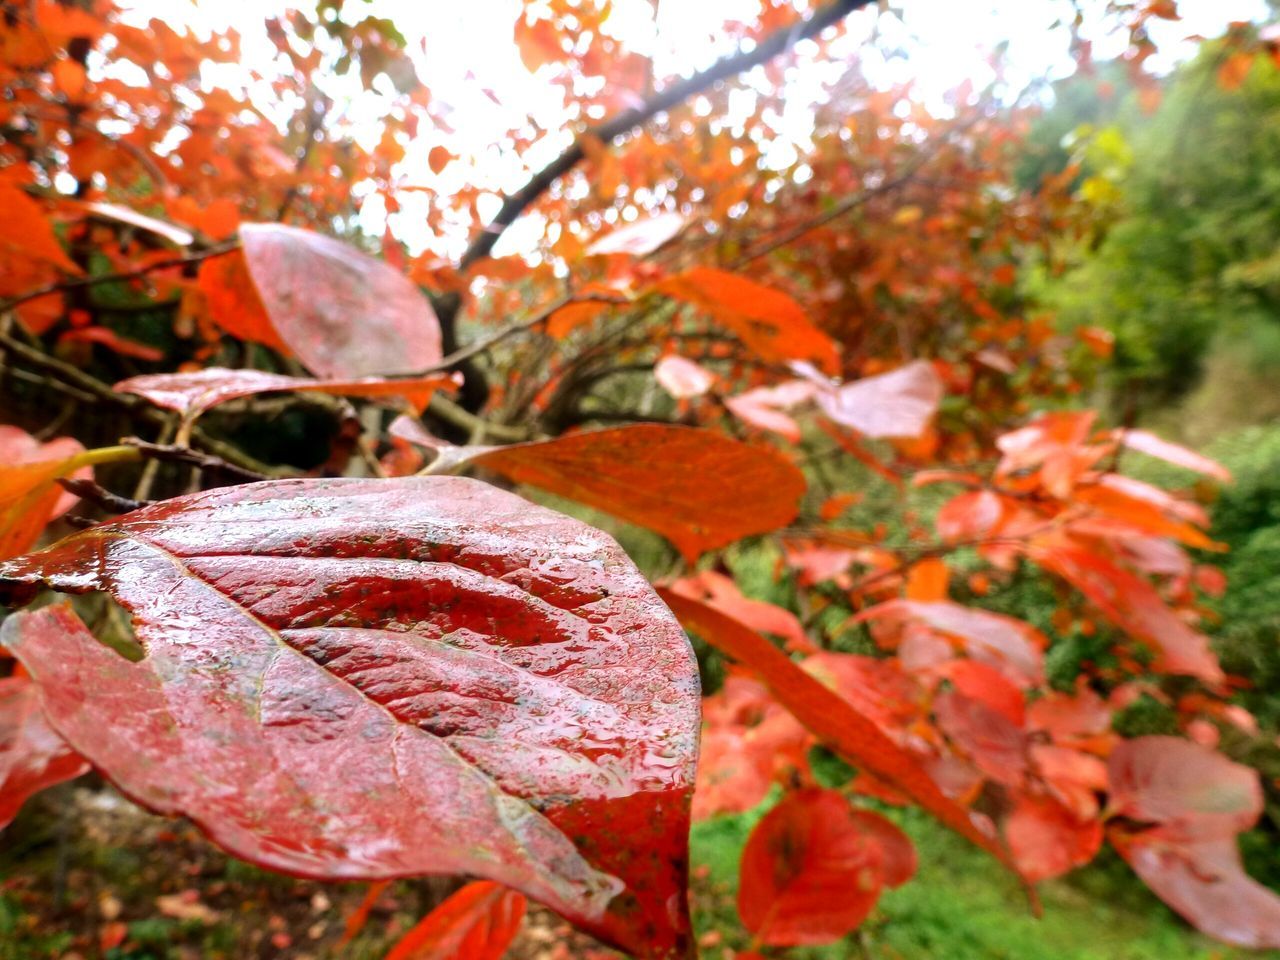 leaf, autumn, change, season, focus on foreground, close-up, growth, nature, tree, leaves, beauty in nature, orange color, tranquility, leaf vein, selective focus, branch, day, red, outdoors, maple leaf